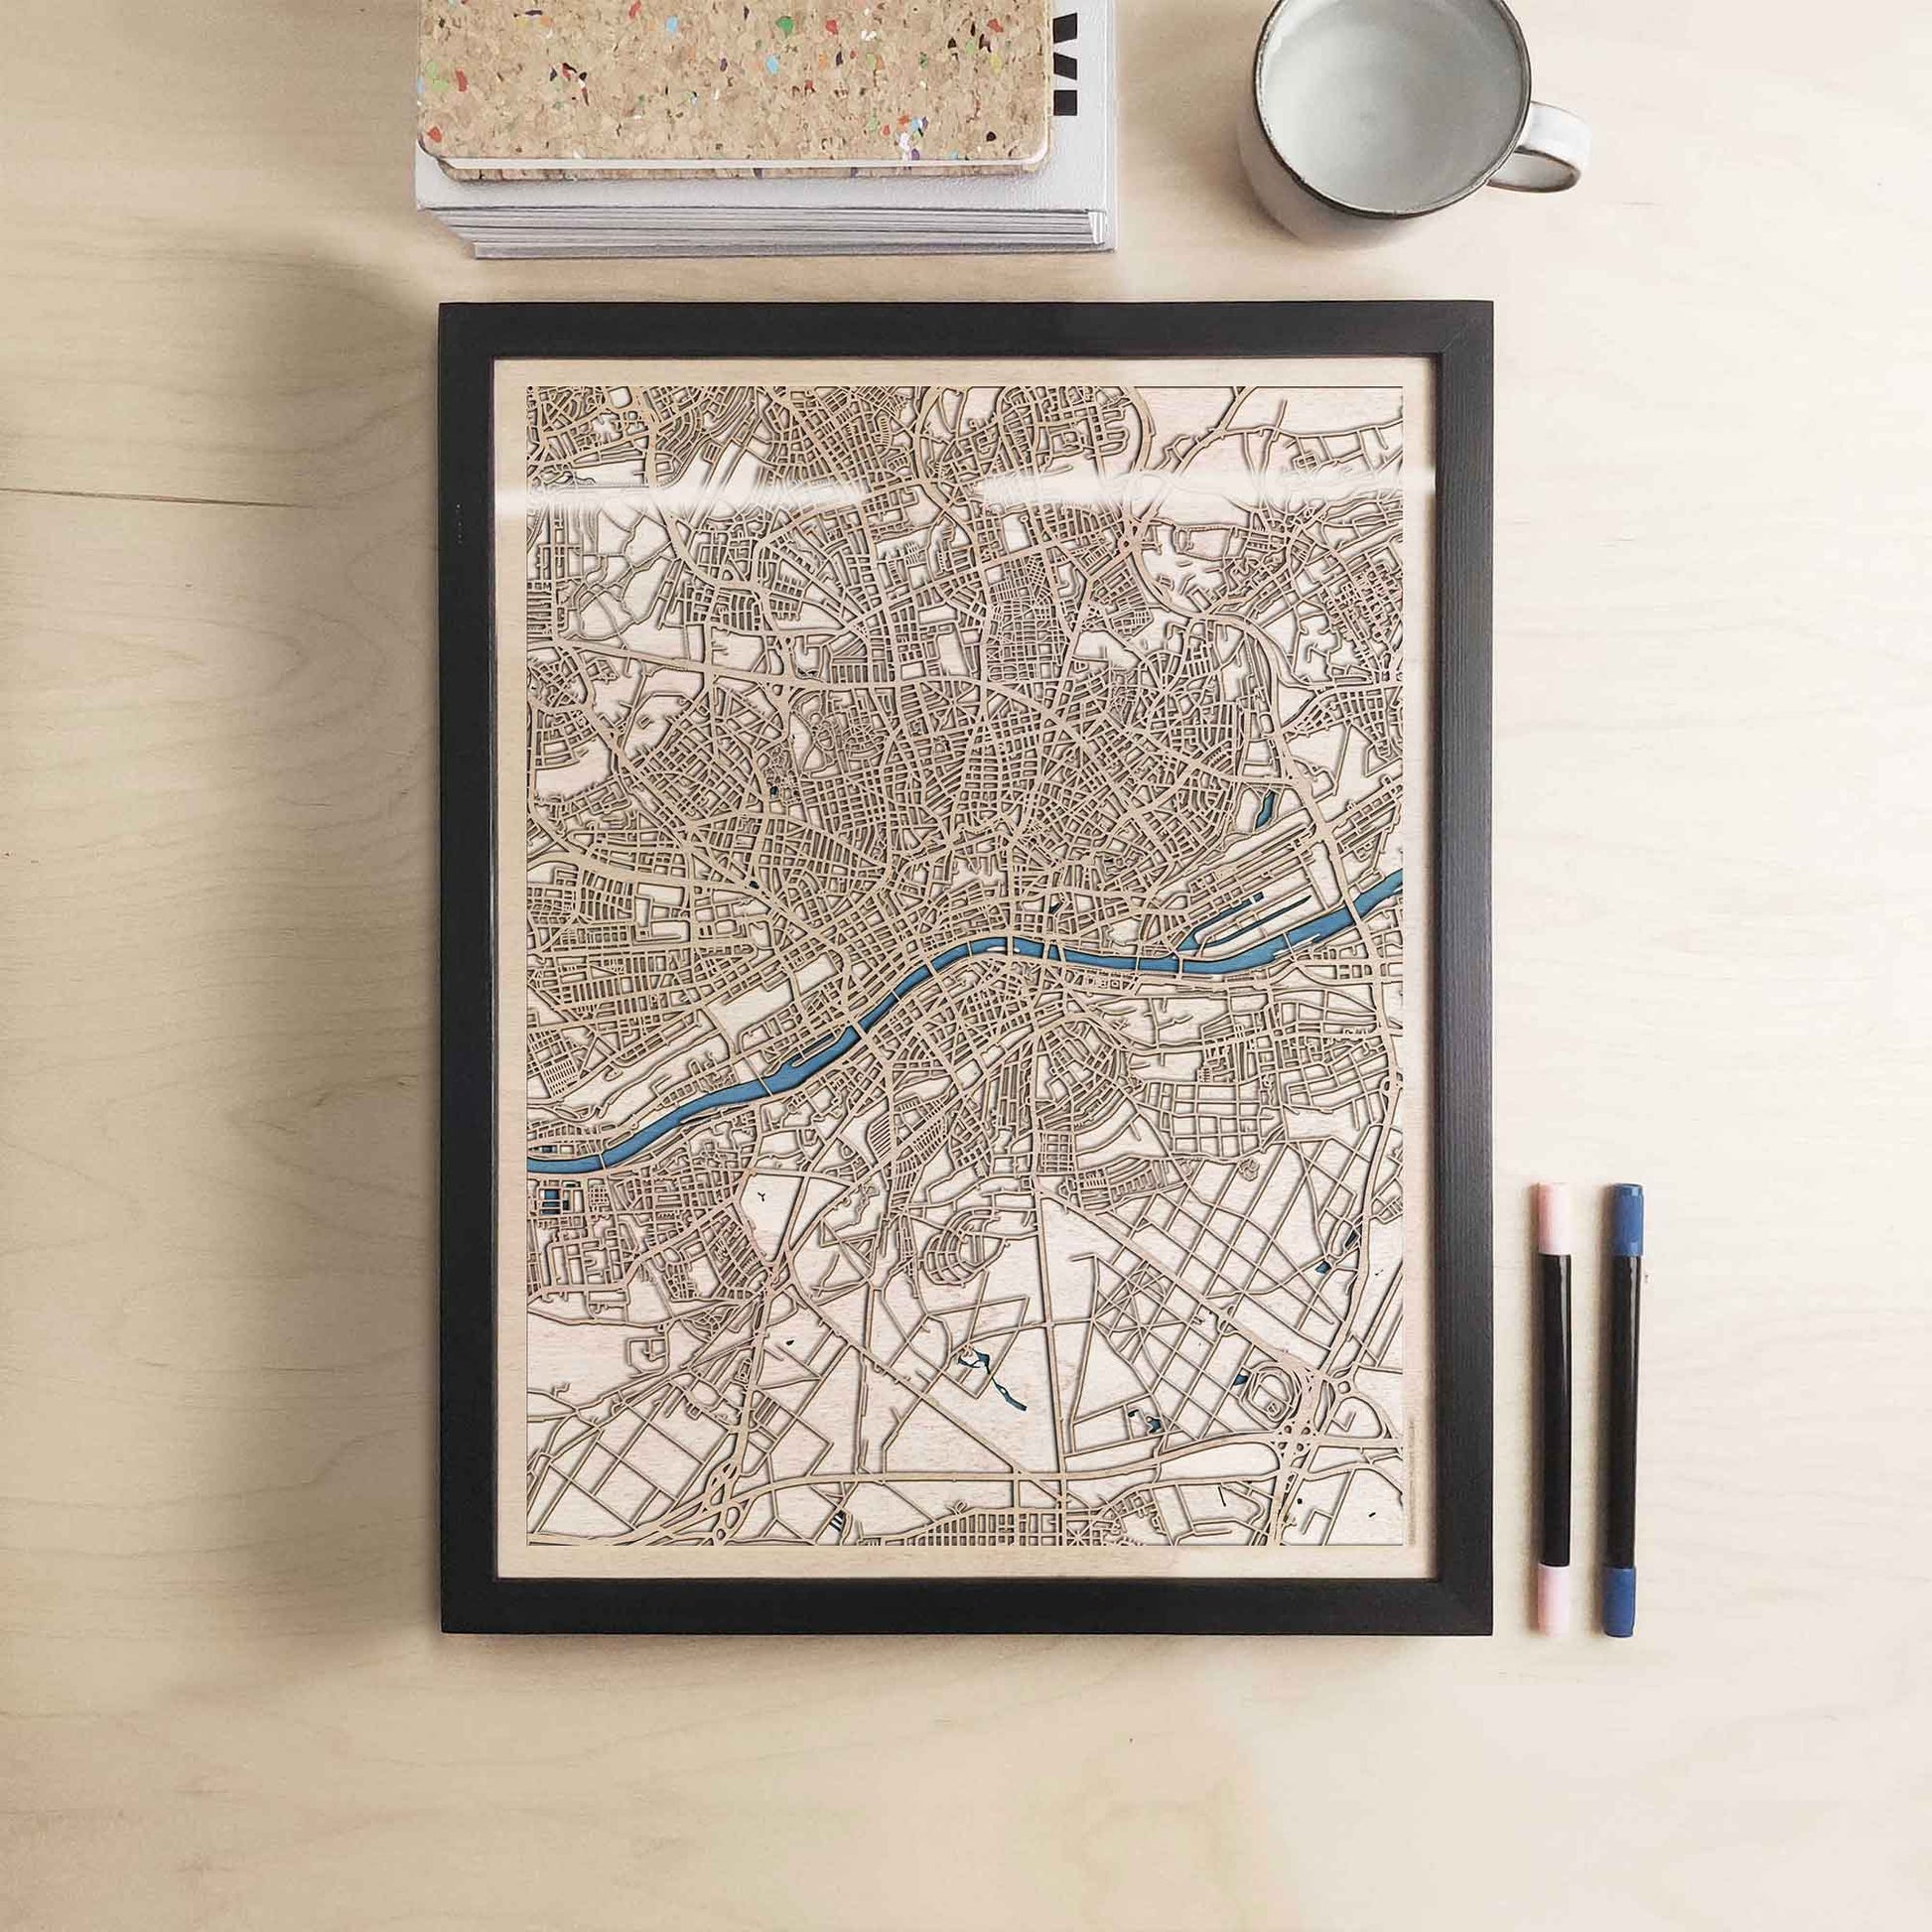 Frankfurt Wooden Map by CityWood - Custom Wood Map Art - Unique Laser Cut Engraved - Anniversary Gift